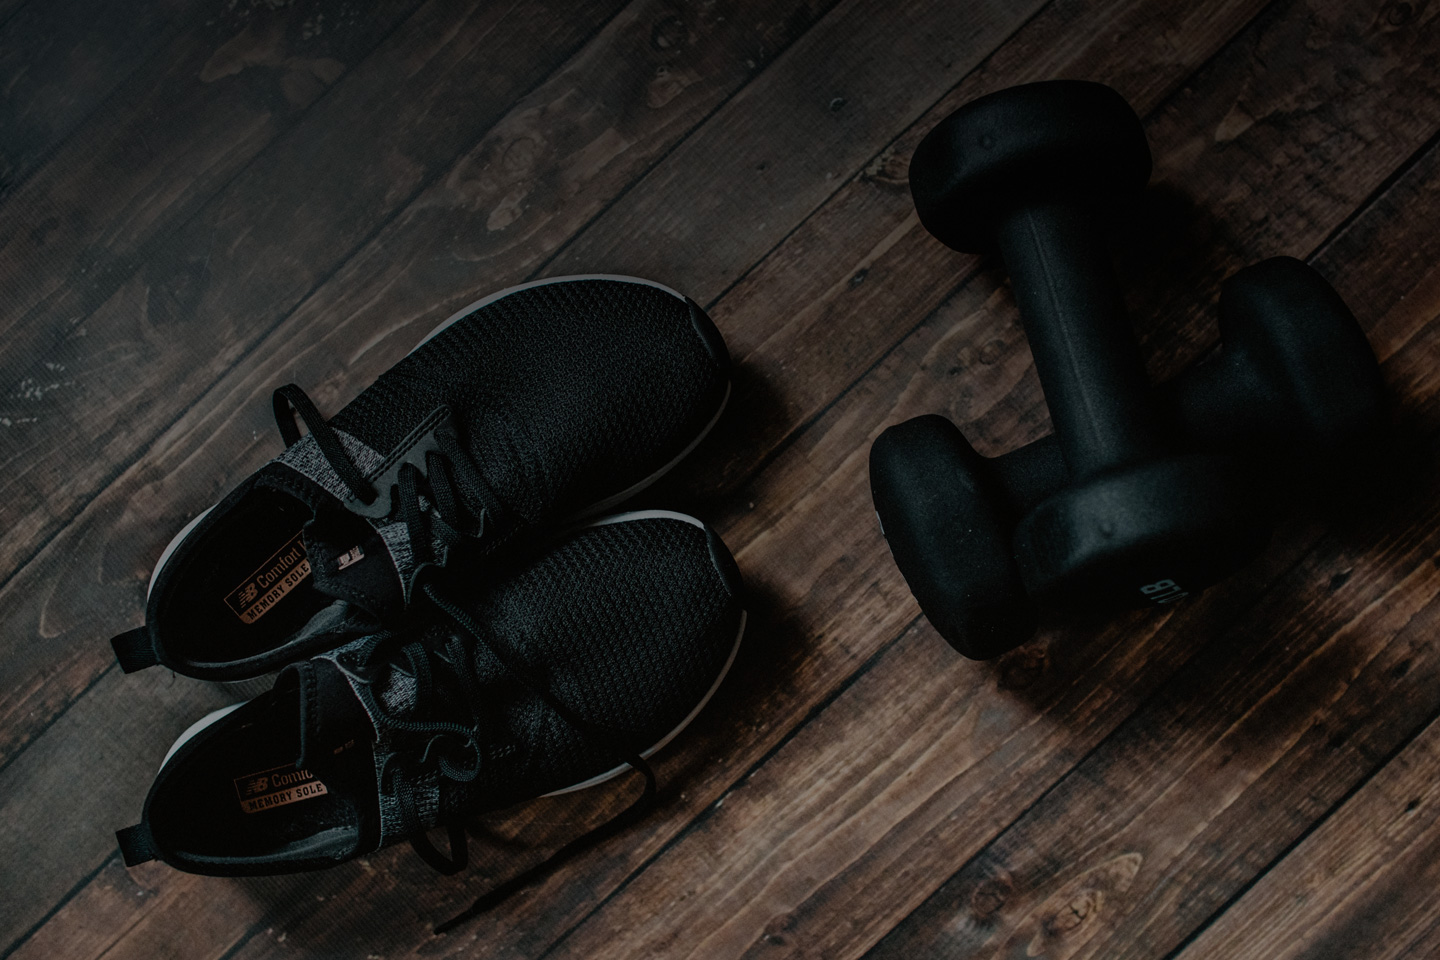 shoes and weights